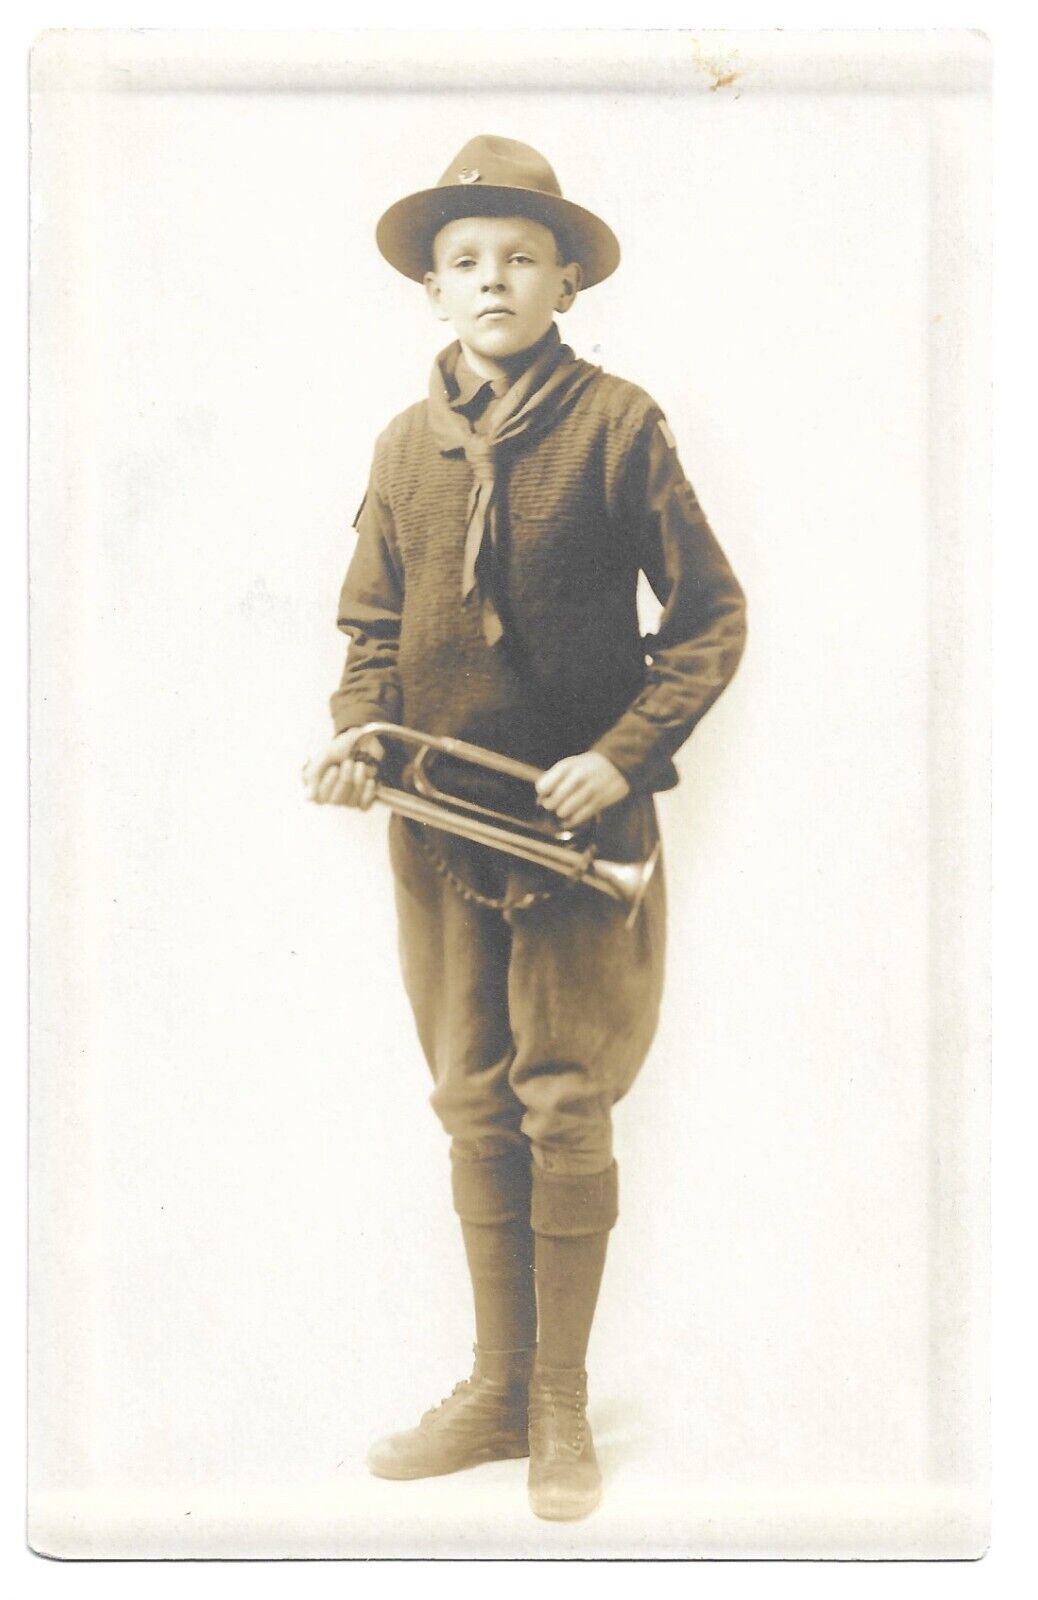 Boyscout With Horn In Studio 1920s Antique RPPC Photo Postcard Brooklyn New York